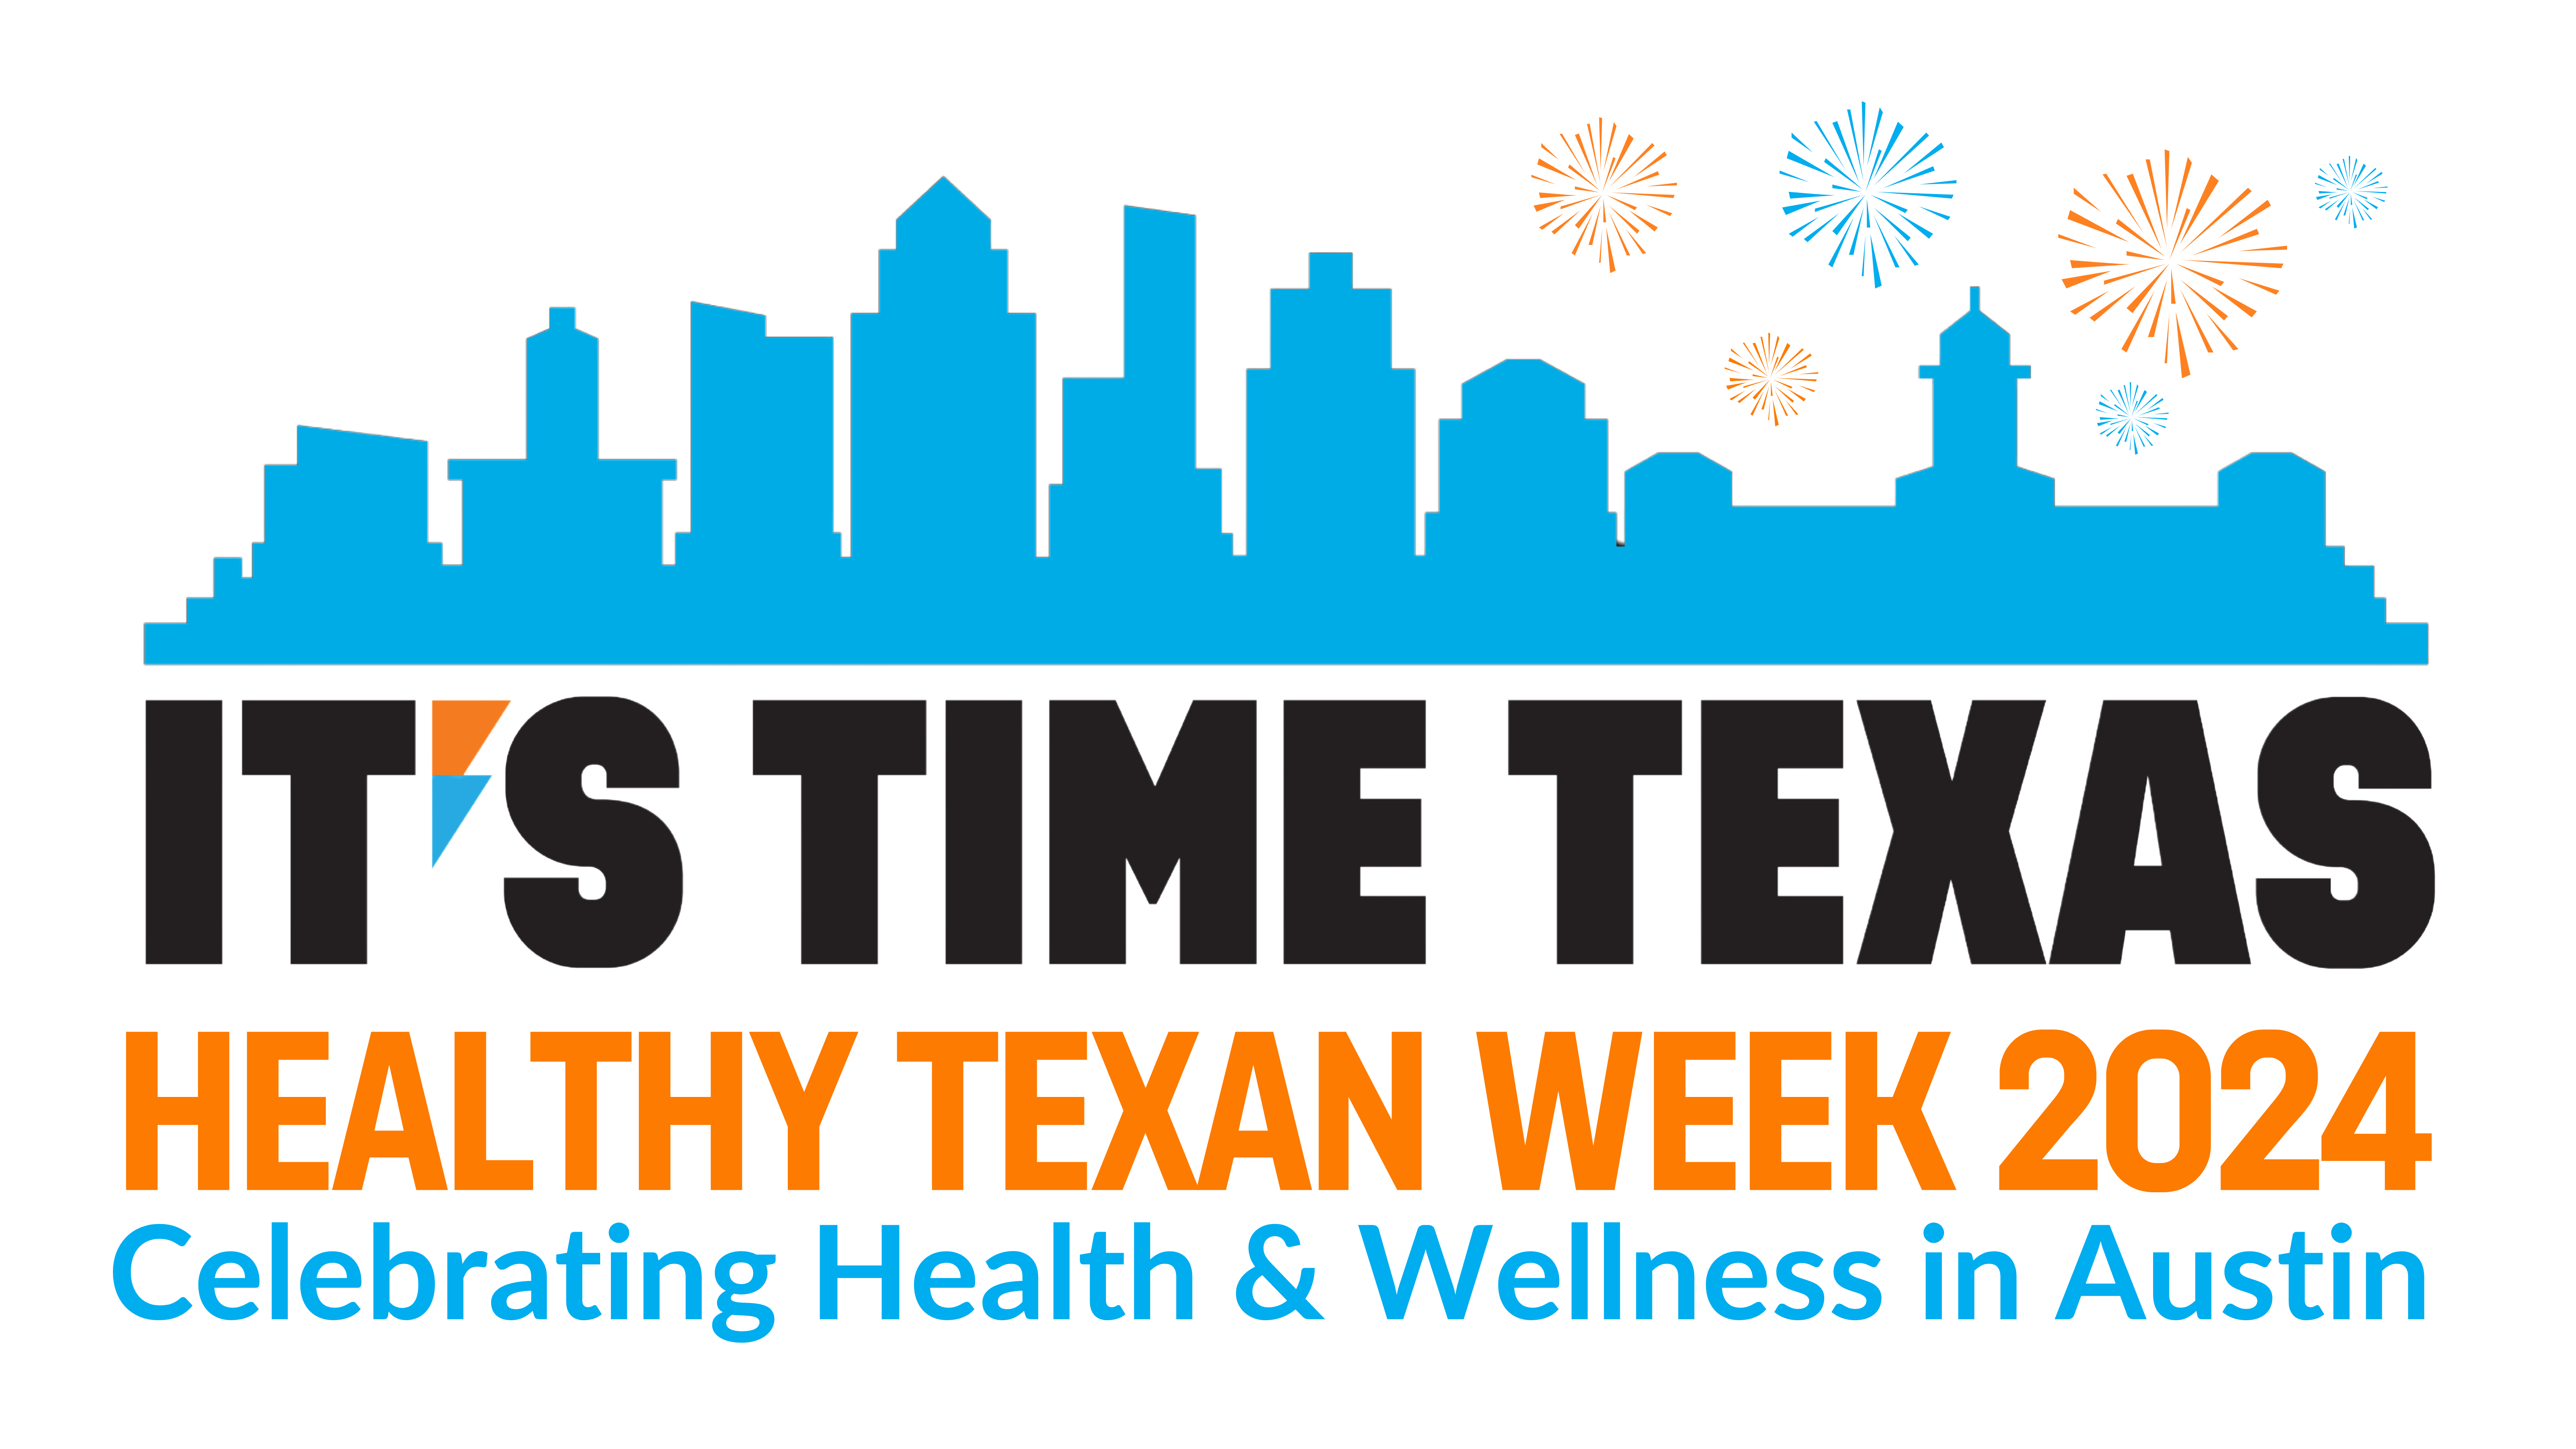 It's Time Texas Healthy Texan Week event in Austin, TX